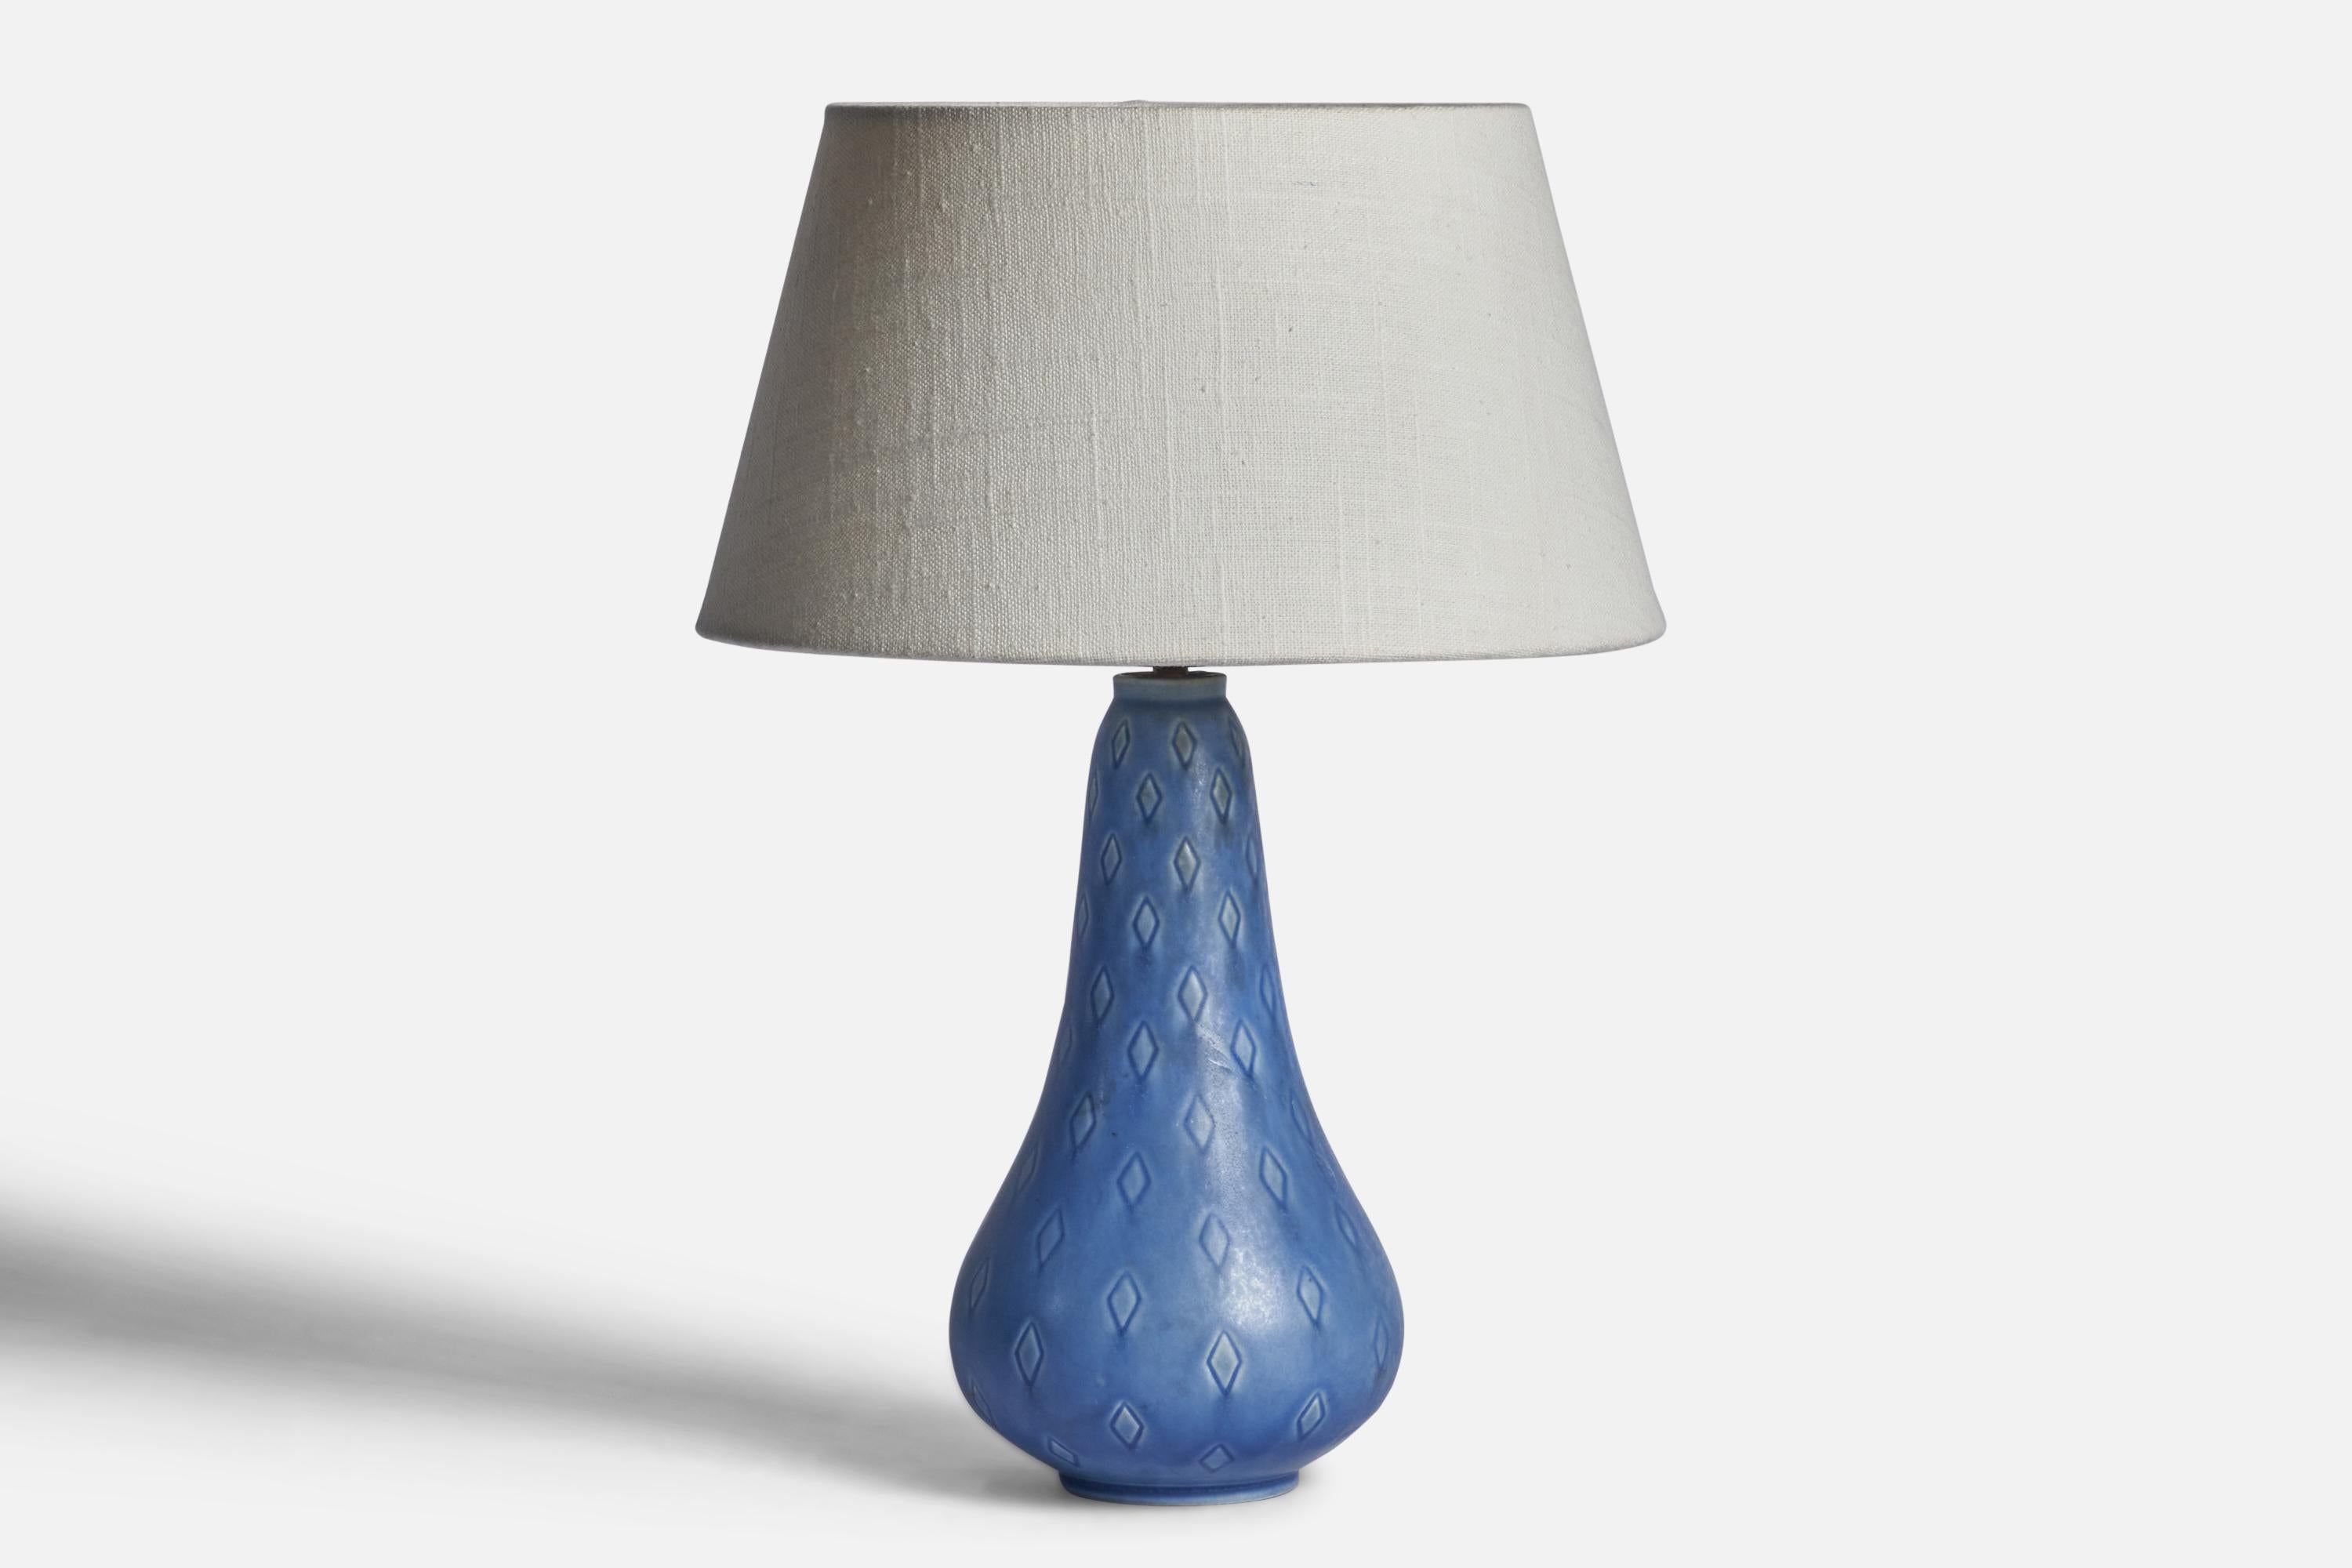 A blue-glazed stoneware table lamp designed and produced in Sweden, 1940s.

Dimensions of Lamp (inches): 11.65” H x 4.65” Diameter
Dimensions of Shade (inches): 7” Top Diameter x 10” Bottom Diameter x 5.5” H 
Dimensions of Lamp with Shade (inches):